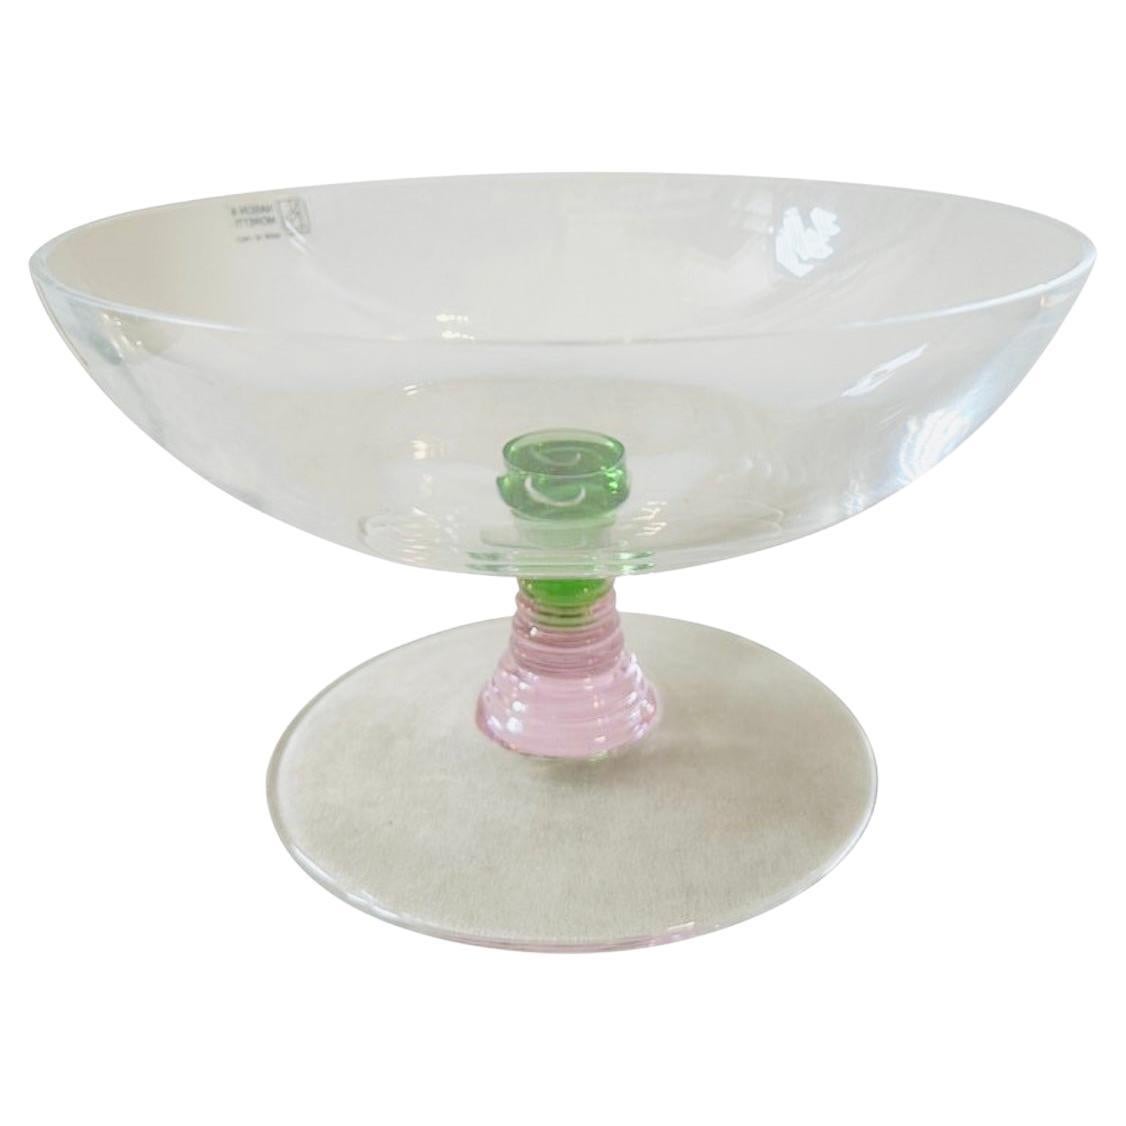 1980s Modern Pink, Green and Clear Murano Glass Bowl By Nason & Moretti For Sale